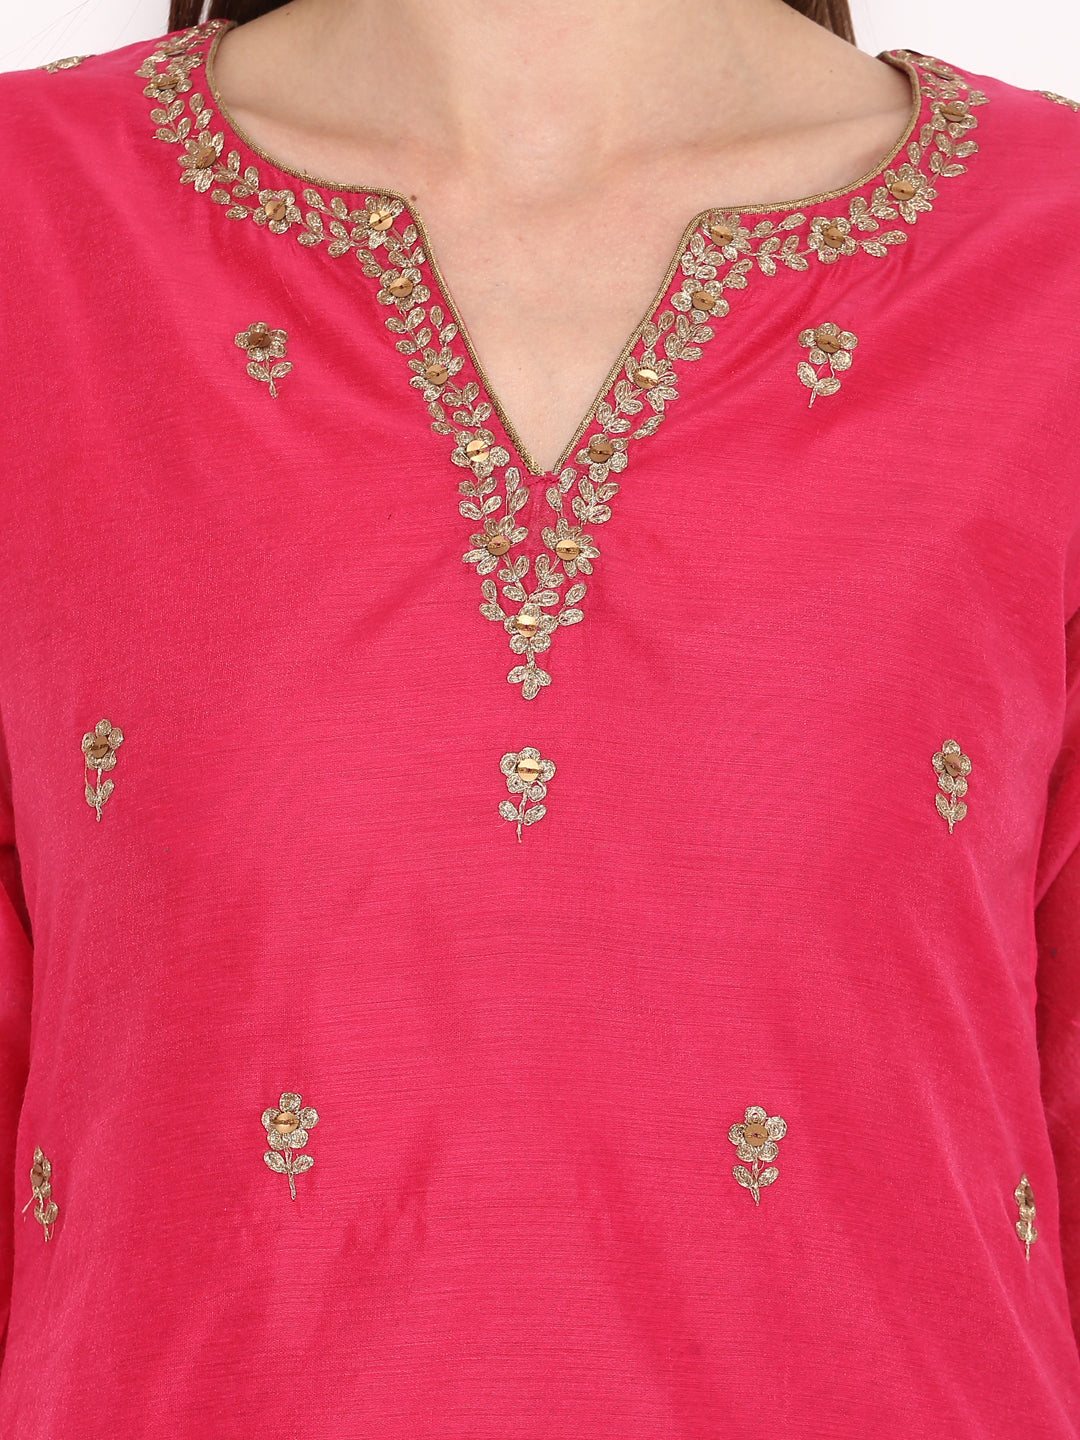 Women's Pink And Golden Embroidered Kurta With Palazzos - Bhama Couture